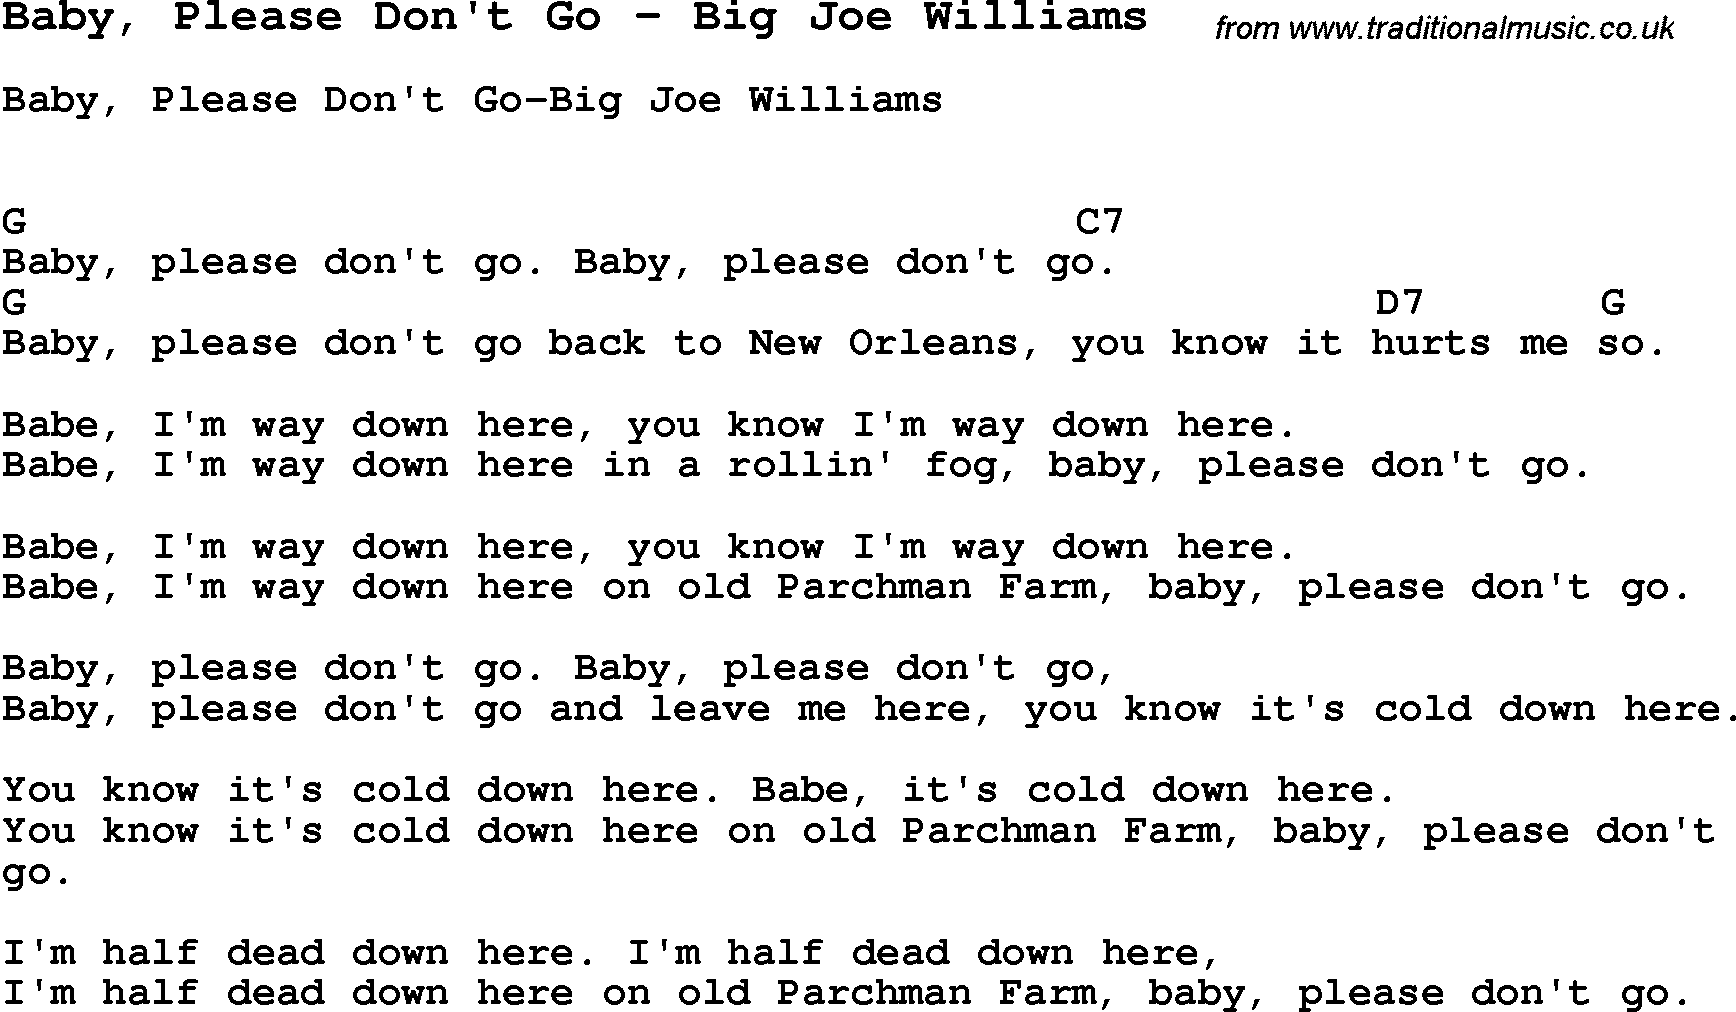 Song Baby, Please Don't Go by Big Joe Williams, with lyrics for vocal performance and accompaniment chords for Ukulele, Guitar Banjo etc.